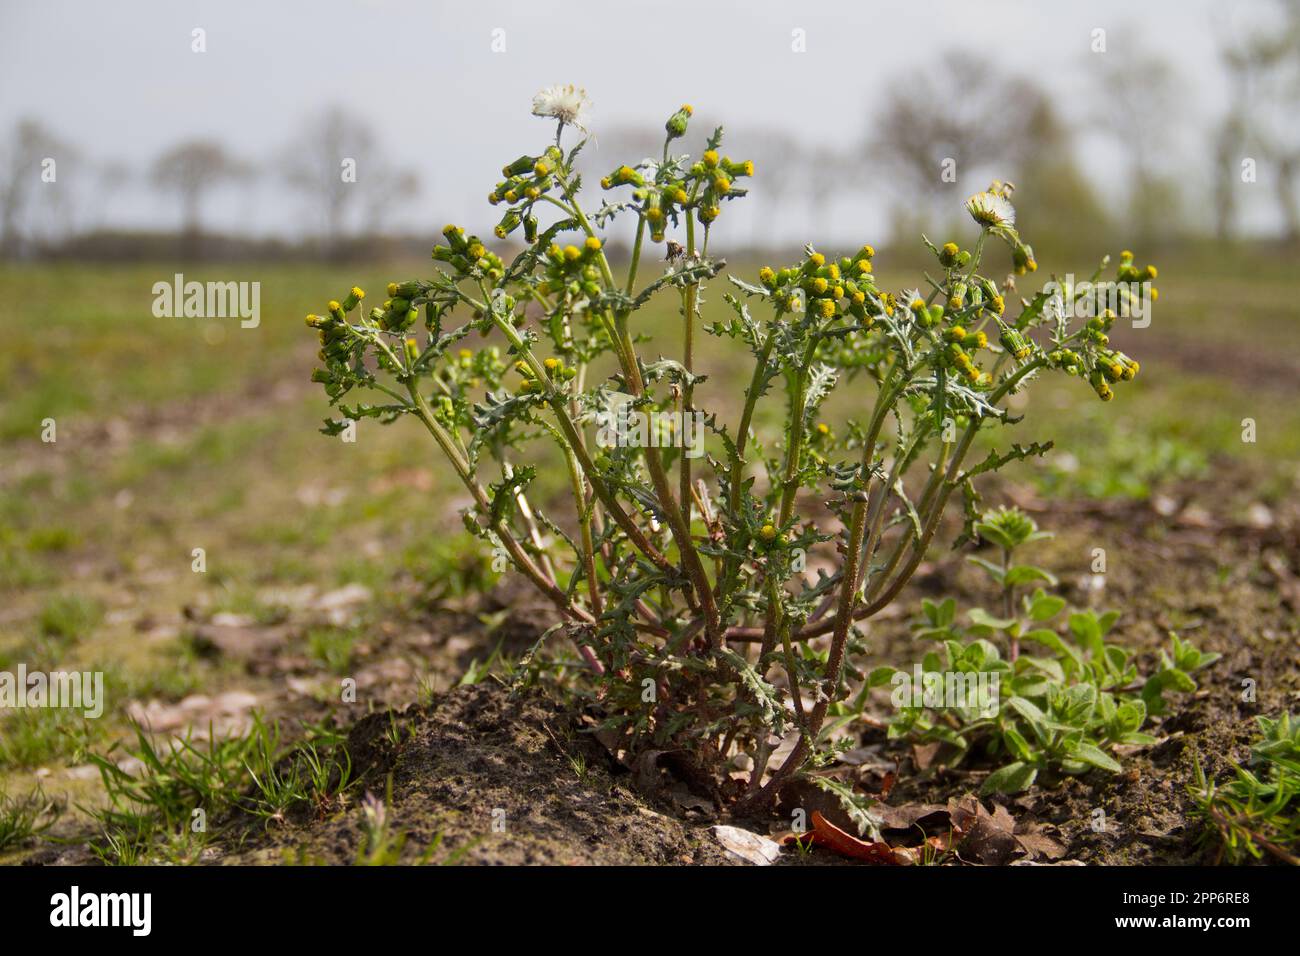 Senecio vulgaris, also known as Groundsel and Old-man-in-the-spring, a weed with yellow flowers on an agricultural field Stock Photo